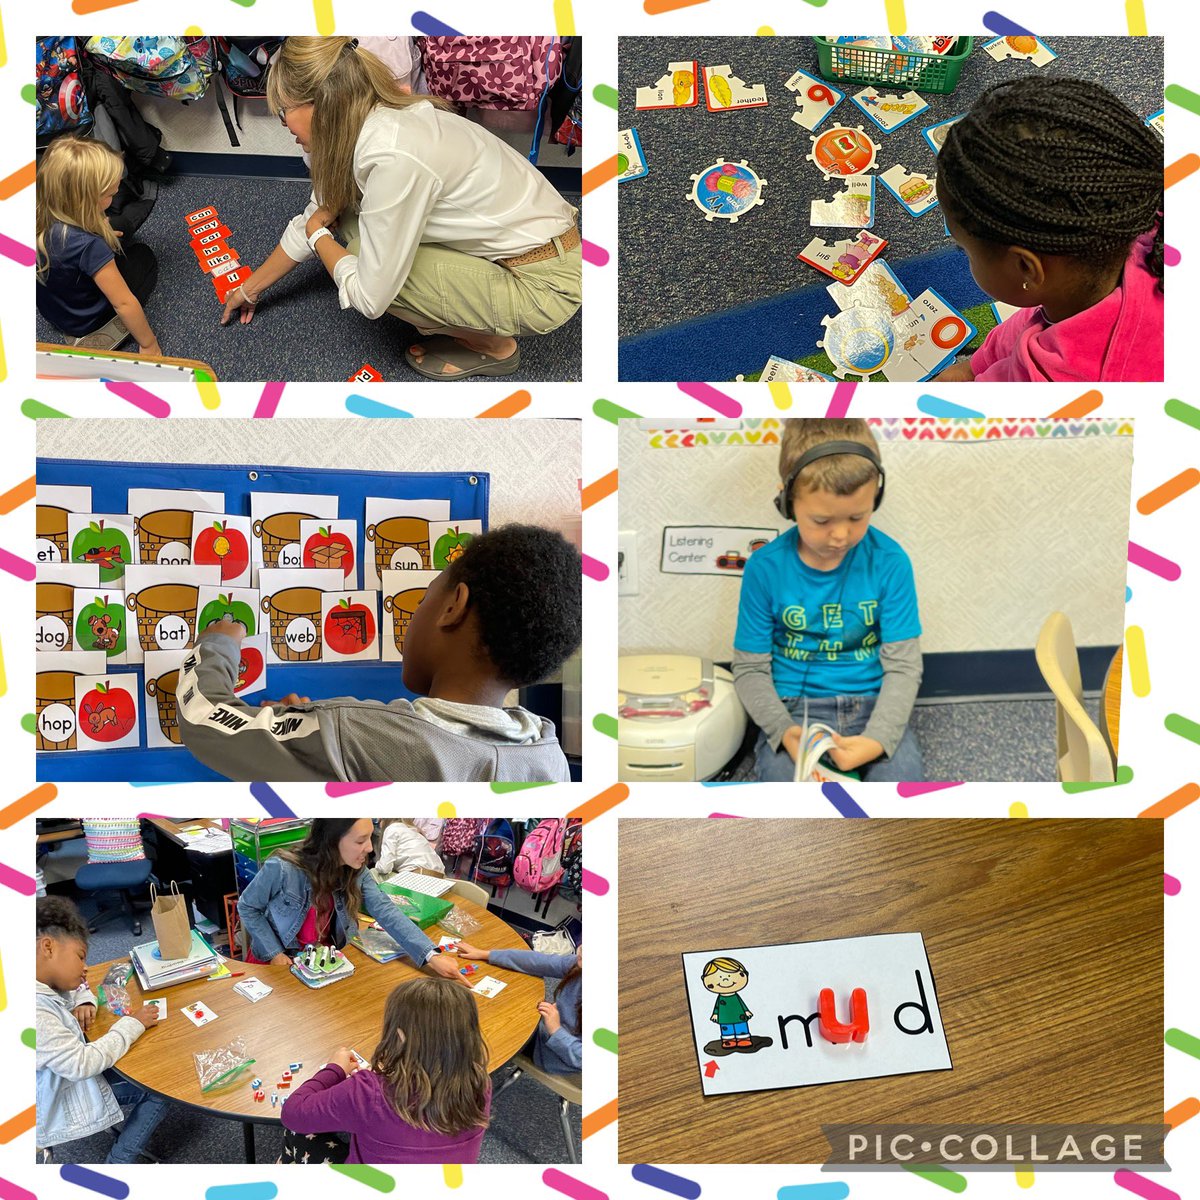 Mrs.Holle’s 1st grade class is working on their stations while students are working at teacher table. These kids know exactly what to do and taught me how to work at their stations! @BoydBlackhawks